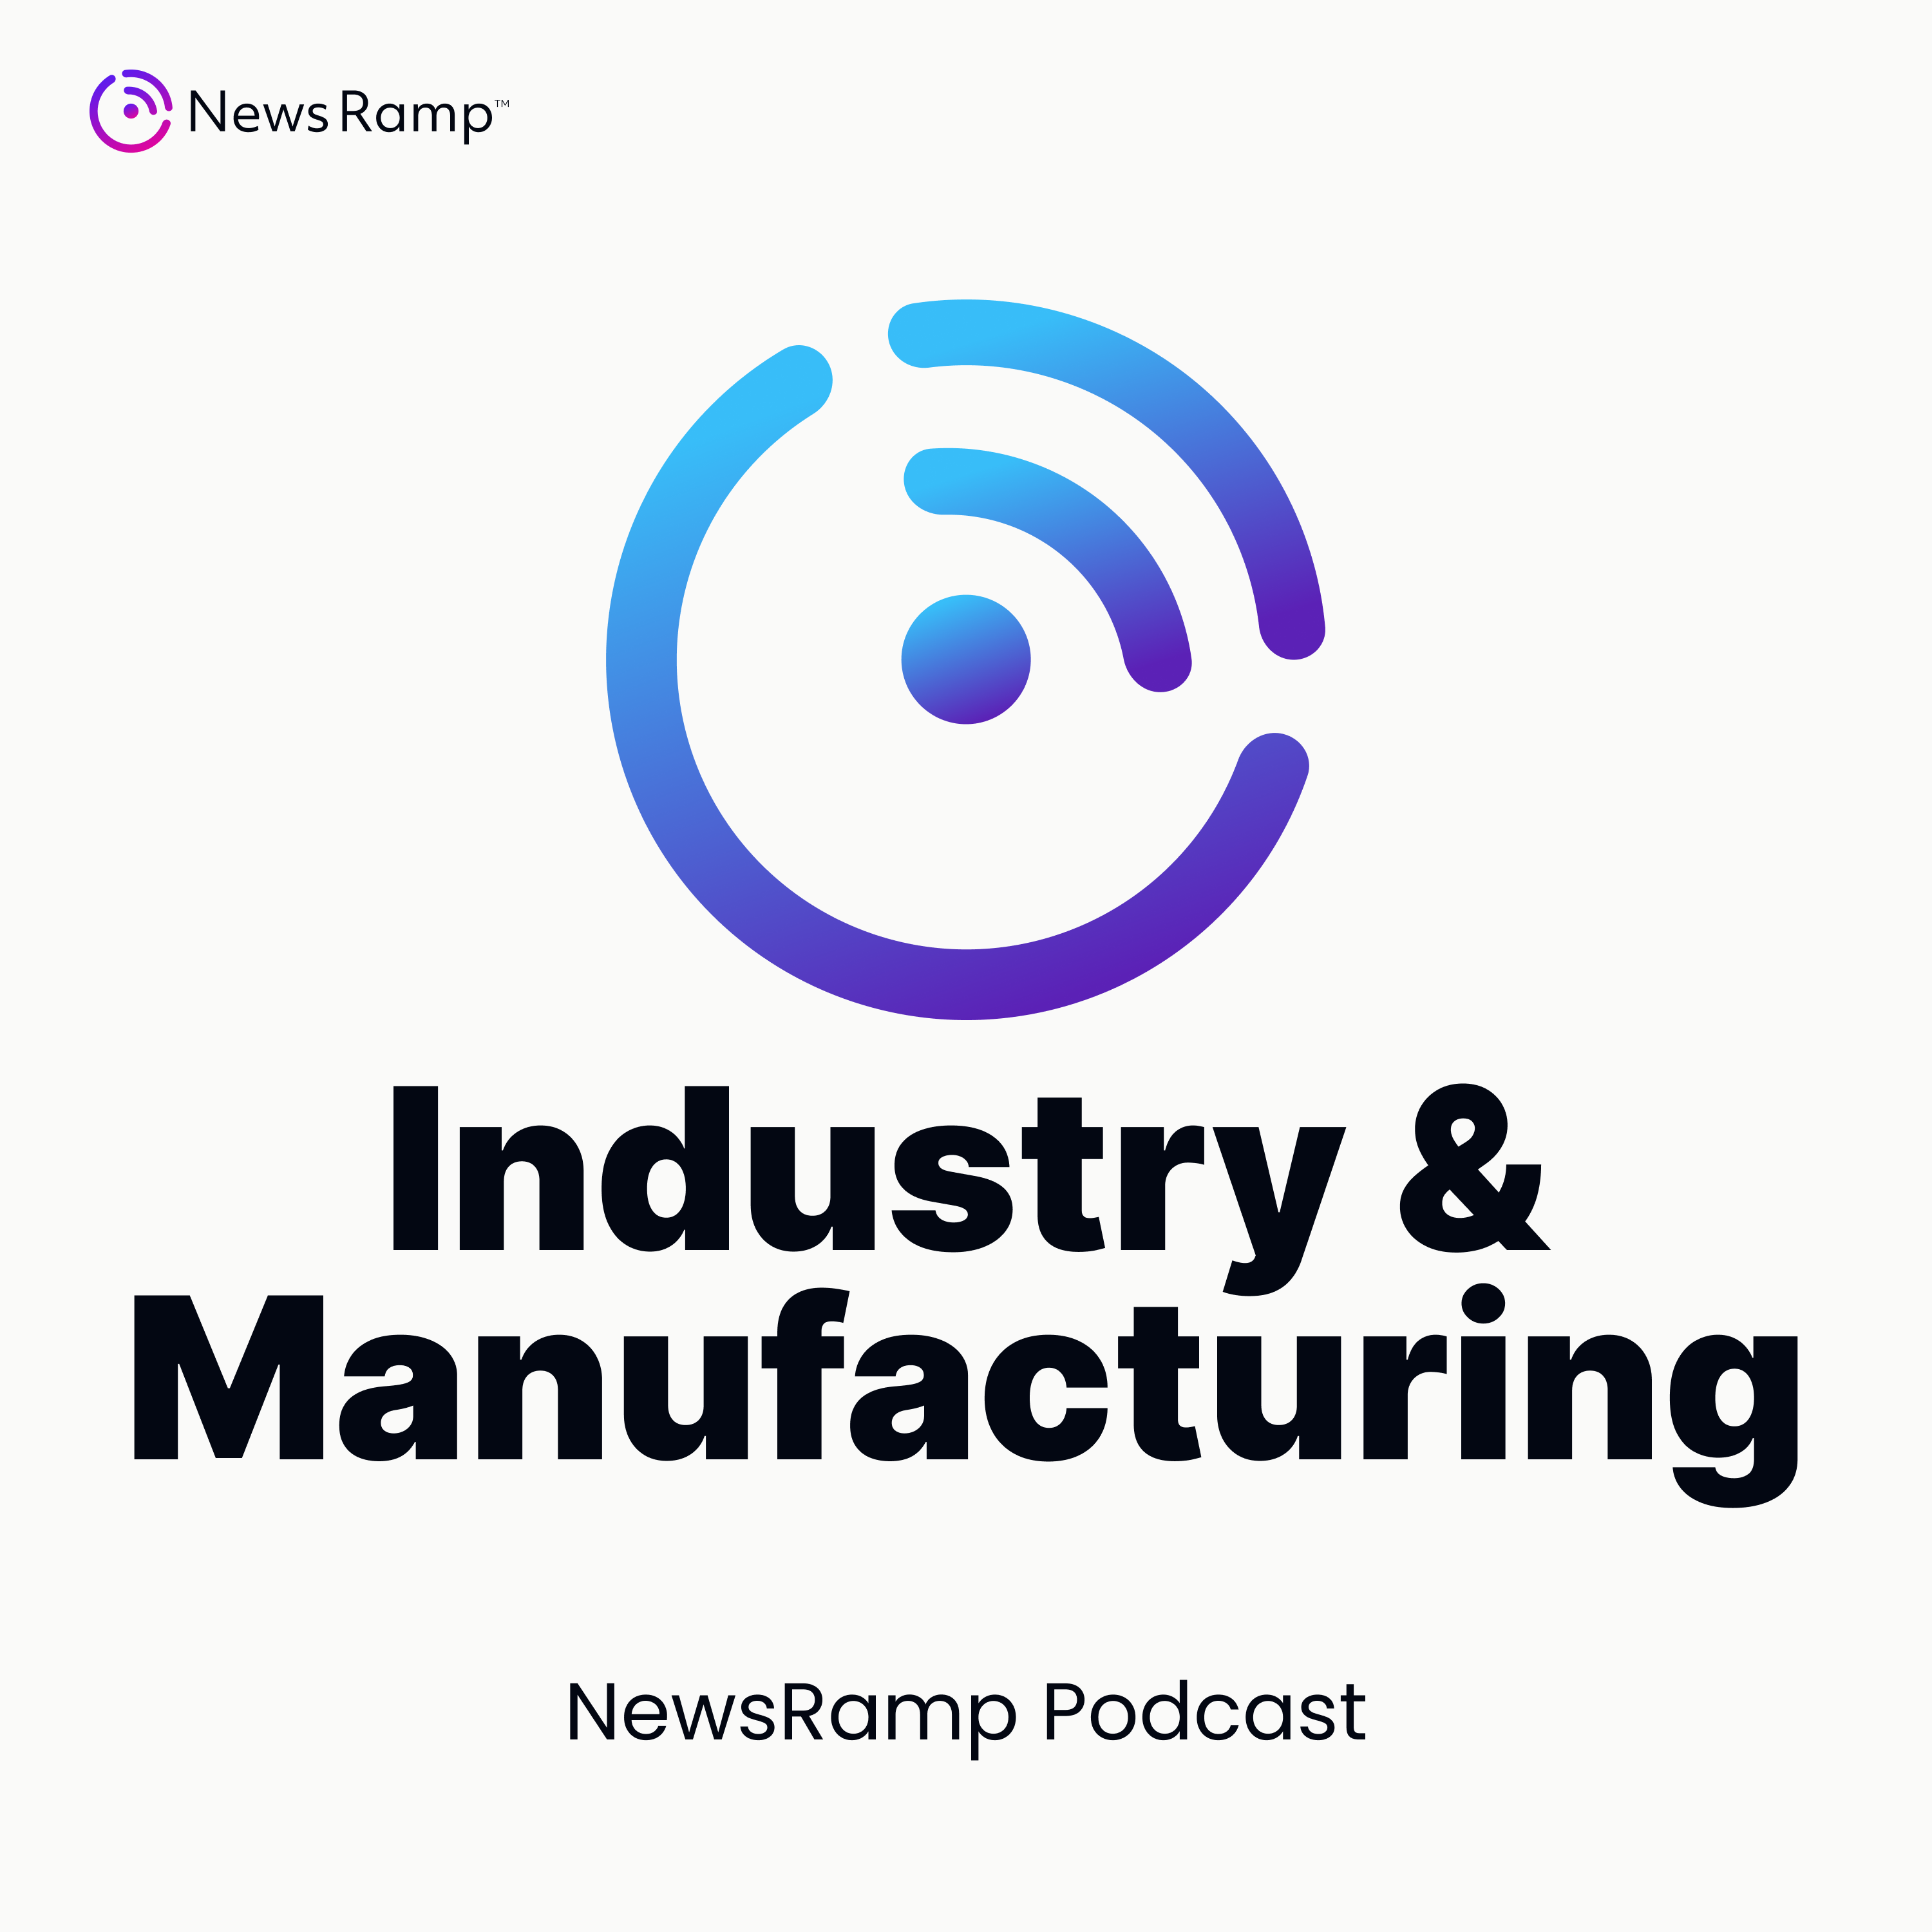 NewsRamp Industrial & Manufacturing Podcast artwork